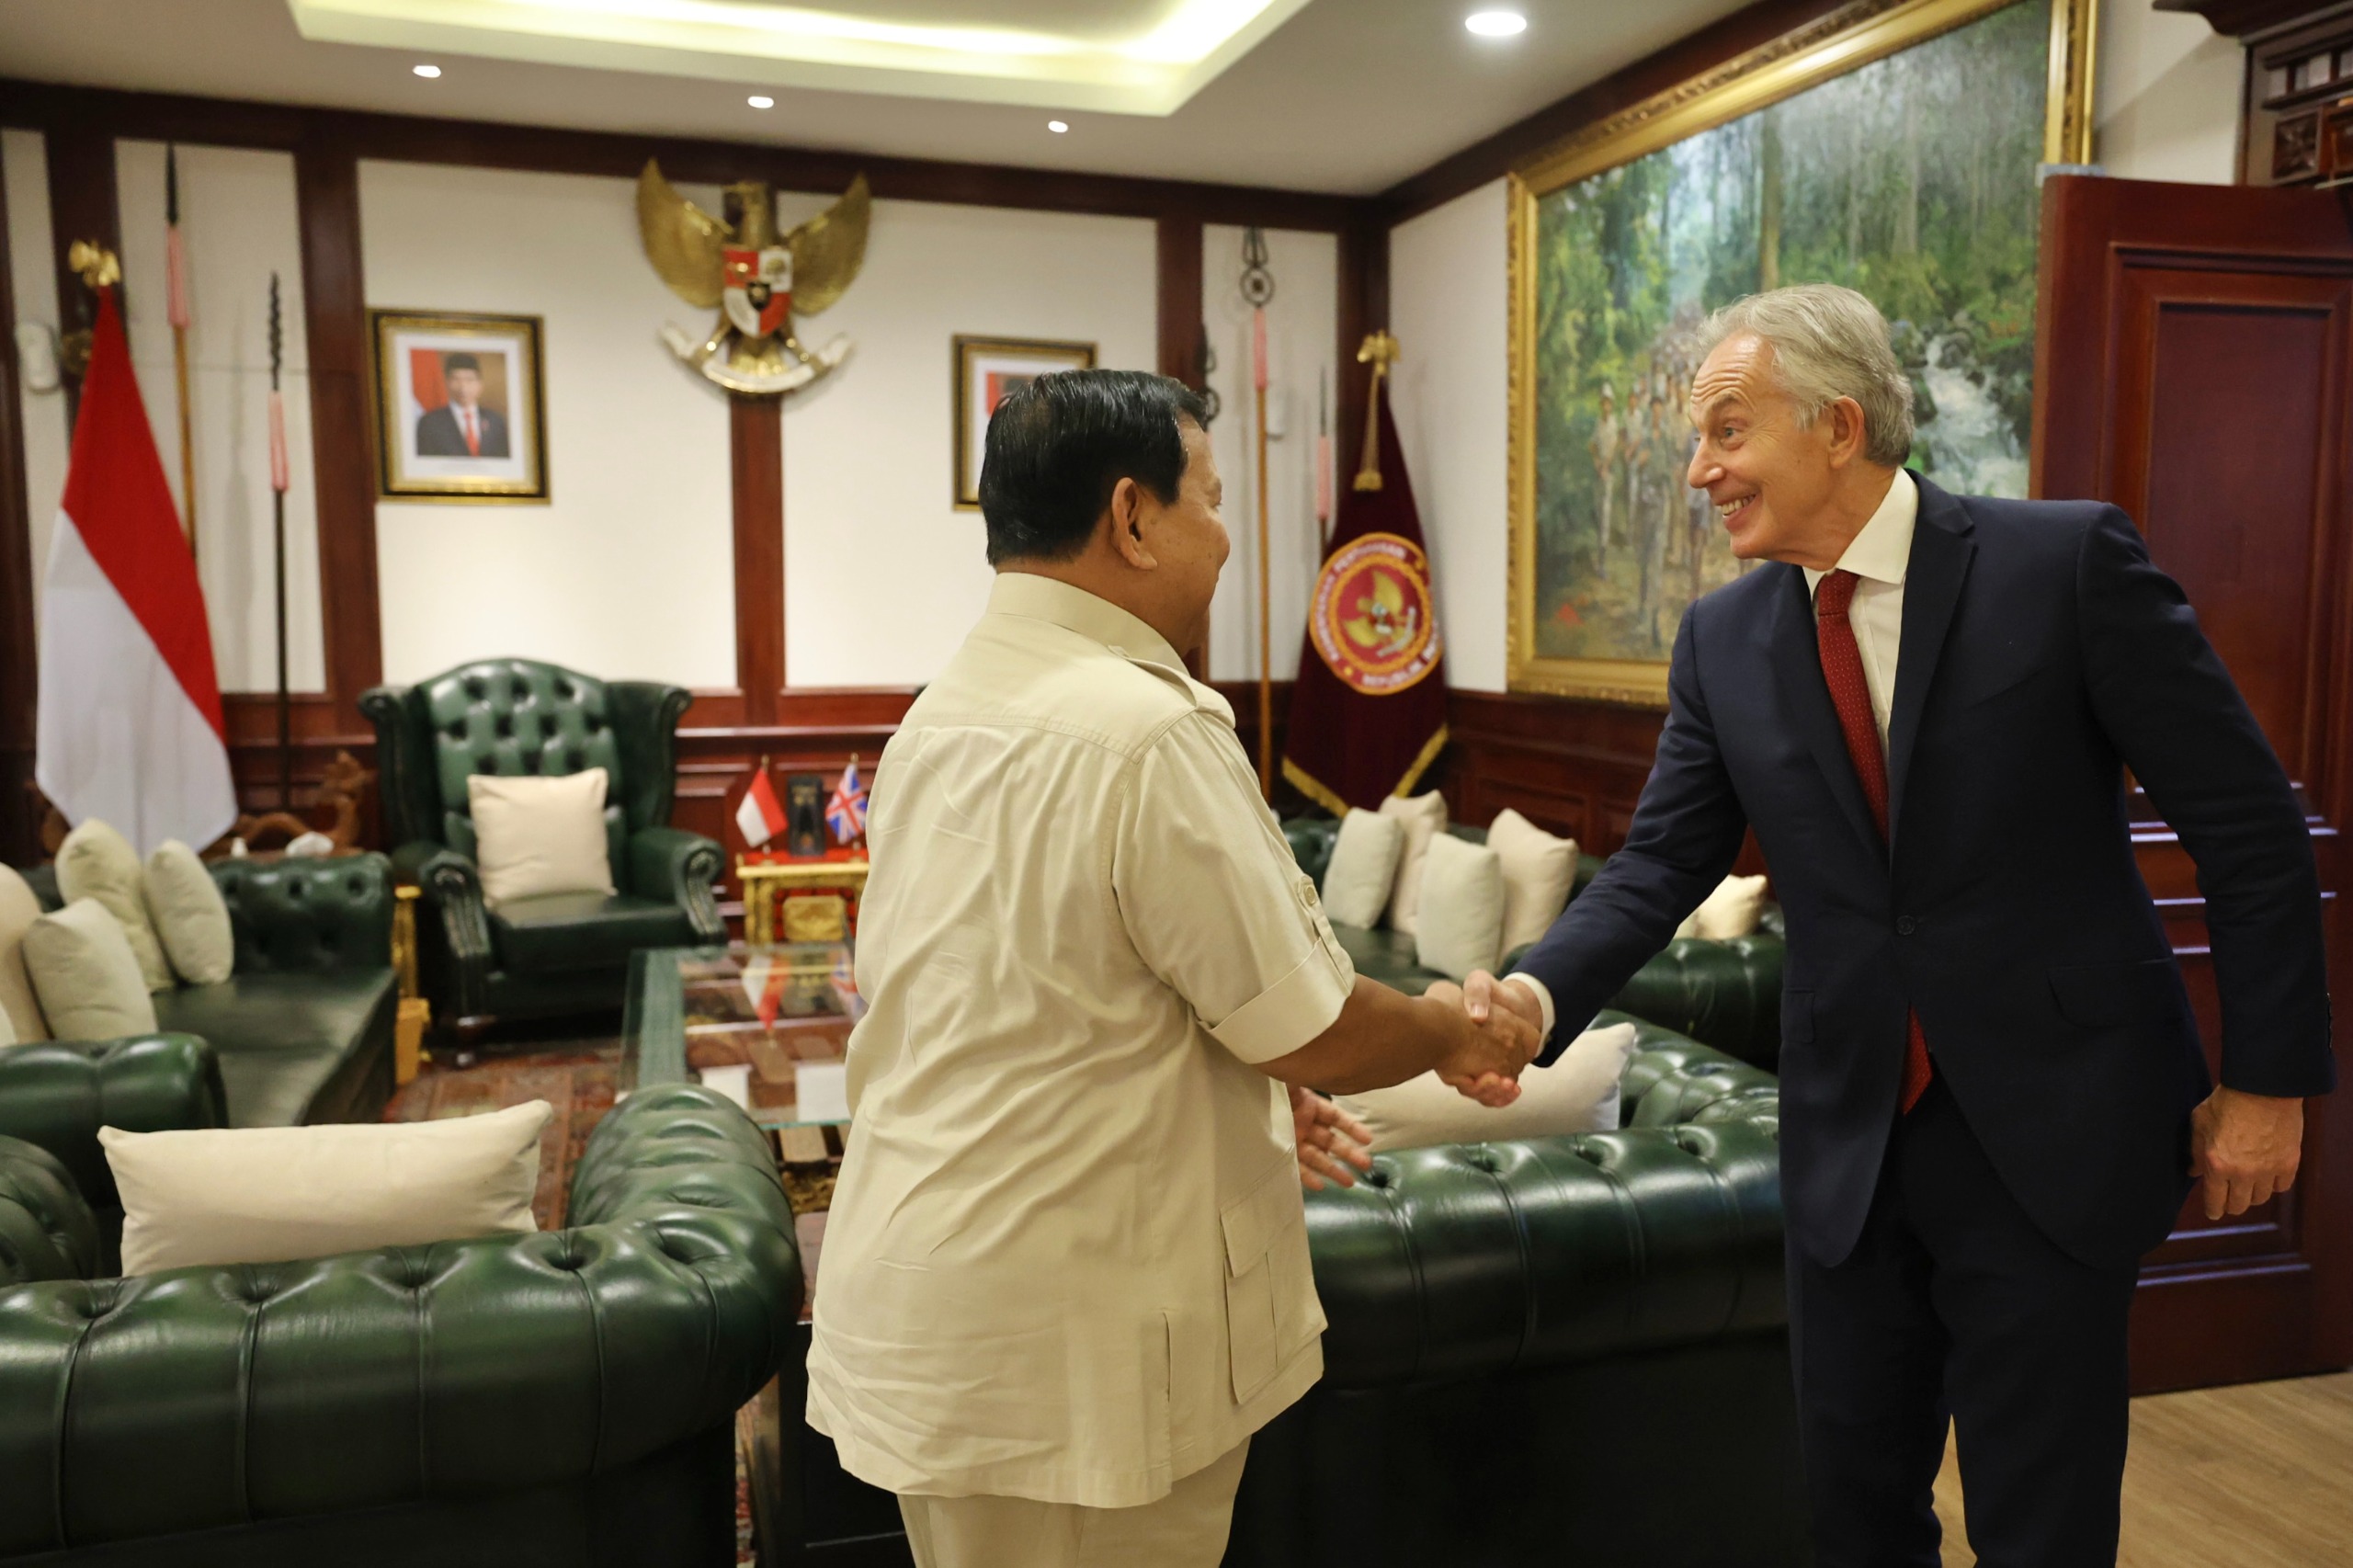 Tony Blair Visits Prabowo Subianto at the Ministry of Defense, Congratulates Him on Presidential Election